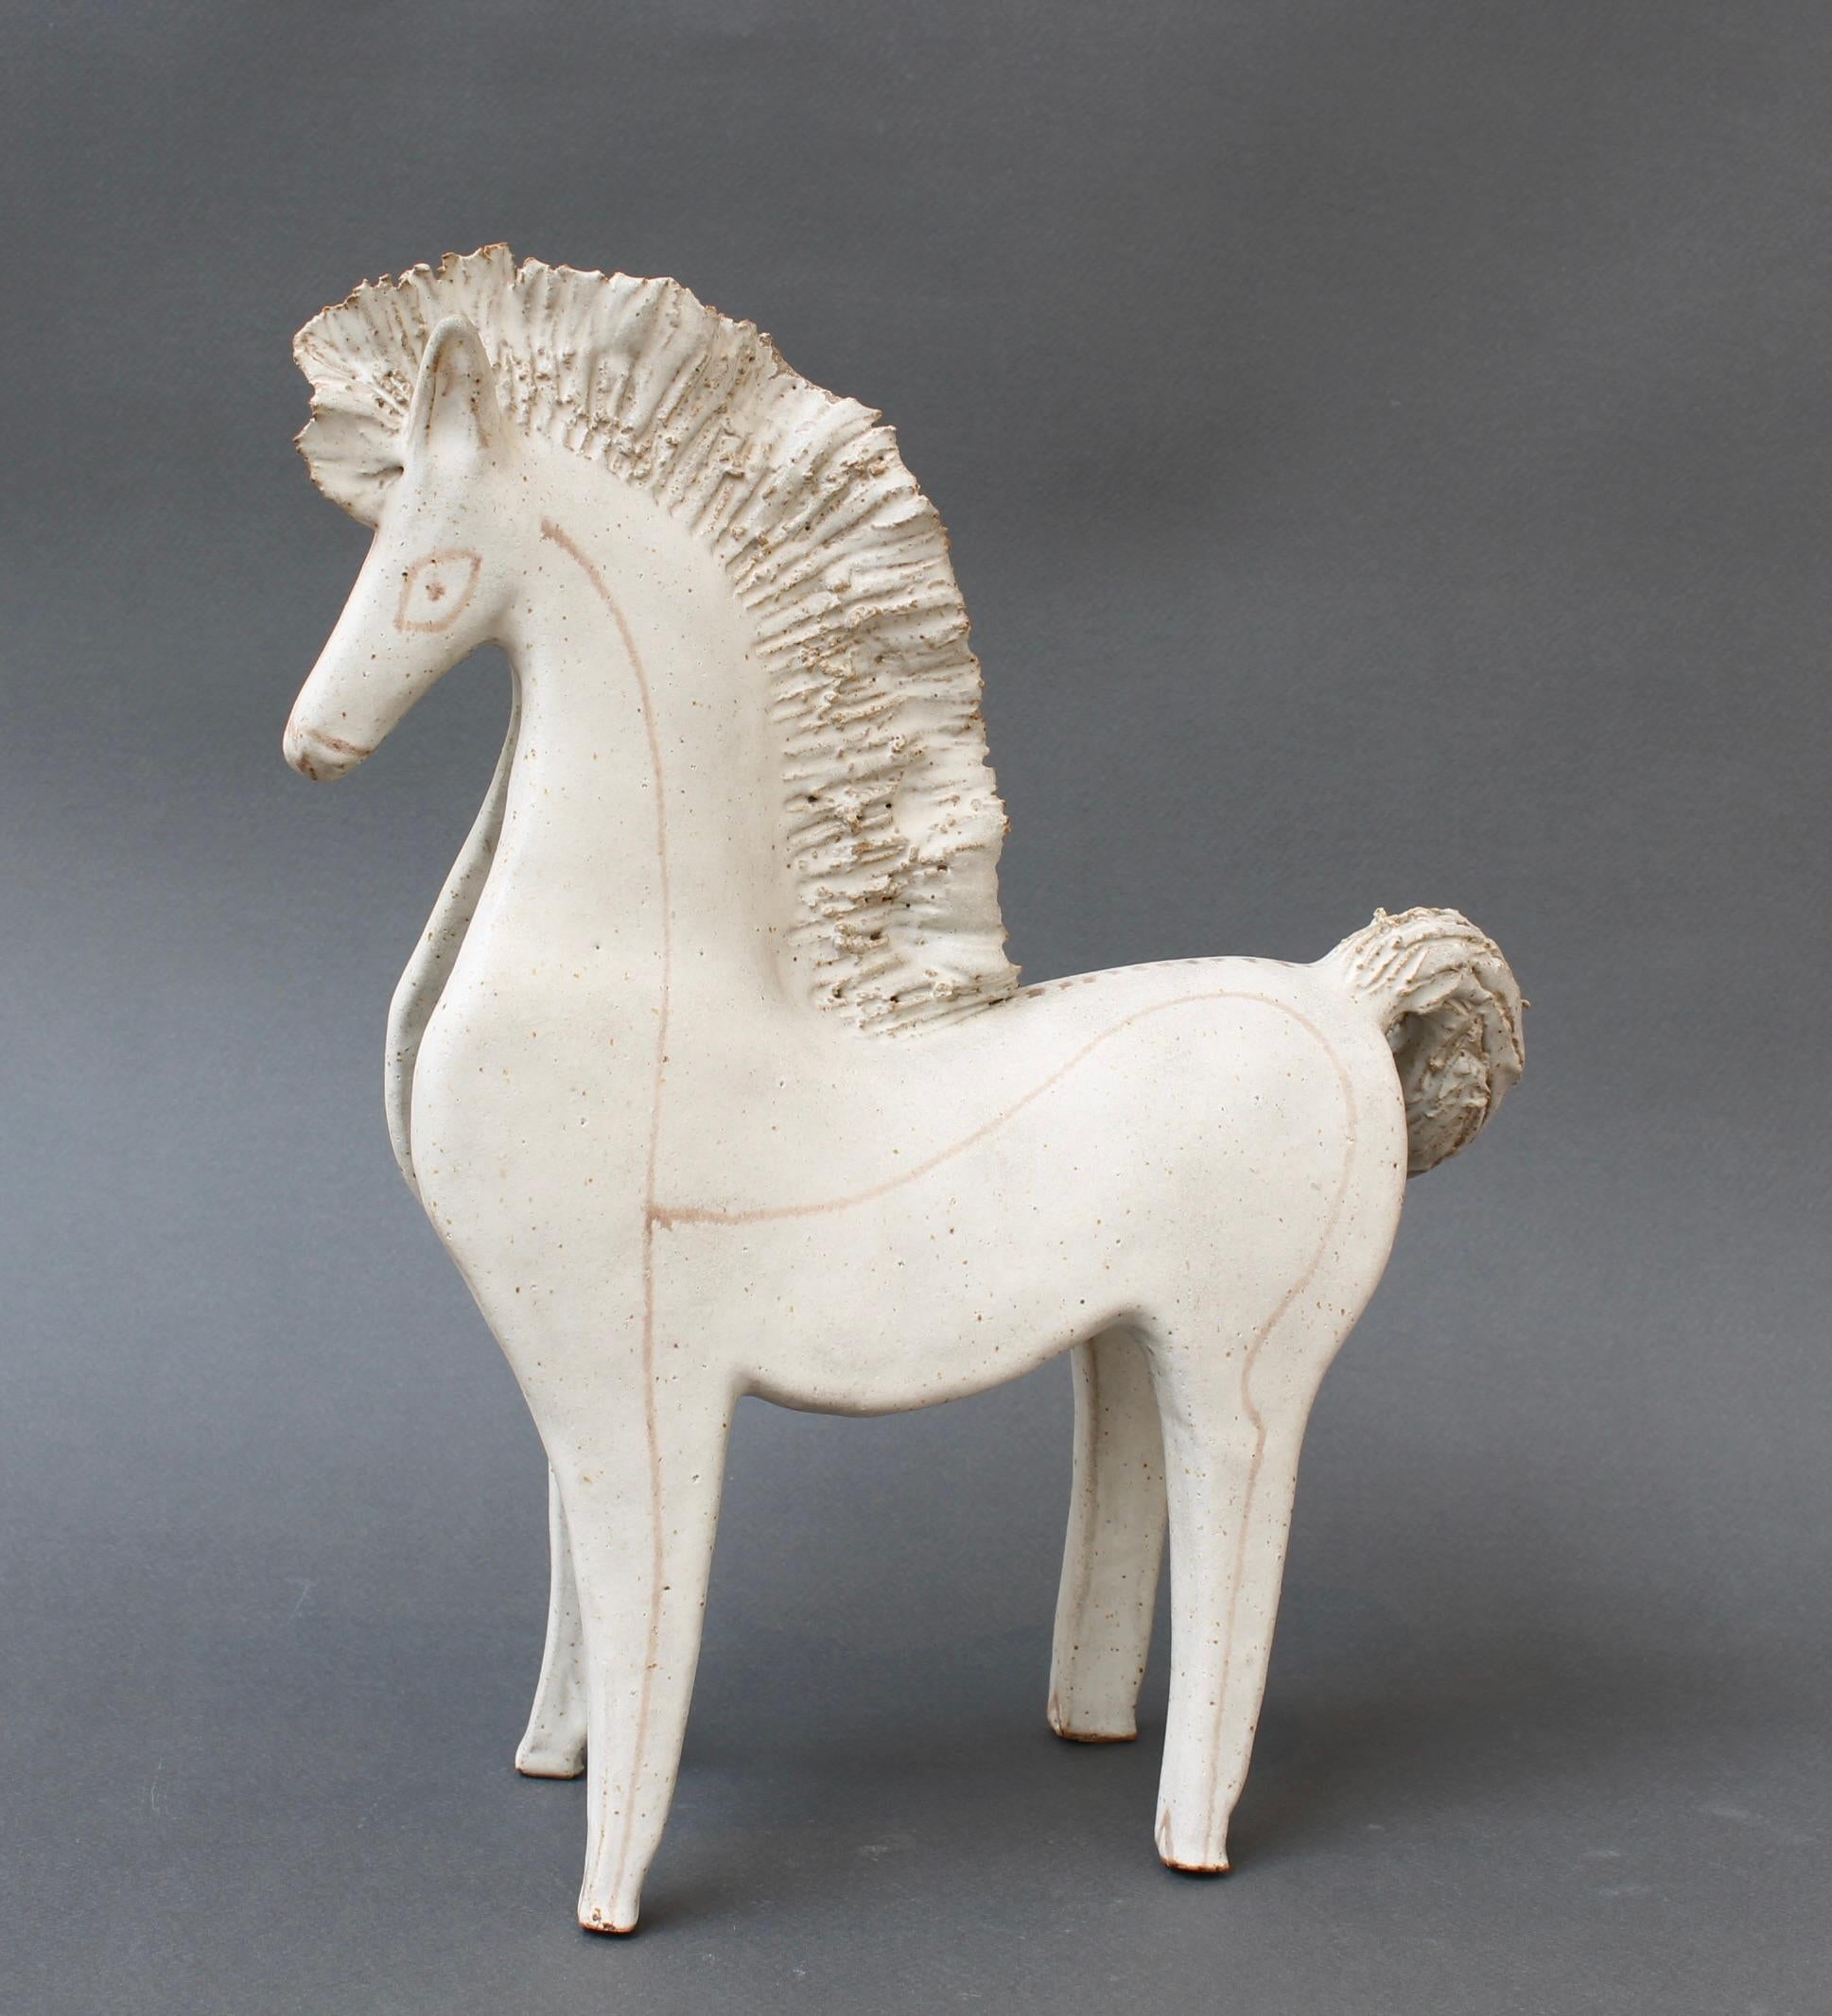 Vintage ceramic horse by Bruno Gambone, (circa 1970s). A charming, sizeable ceramic parade horse with groomed mane and tail in Gambone's signature chalk-white glaze. Light brown figure lines complement the glaze on the body, hindquarters and the